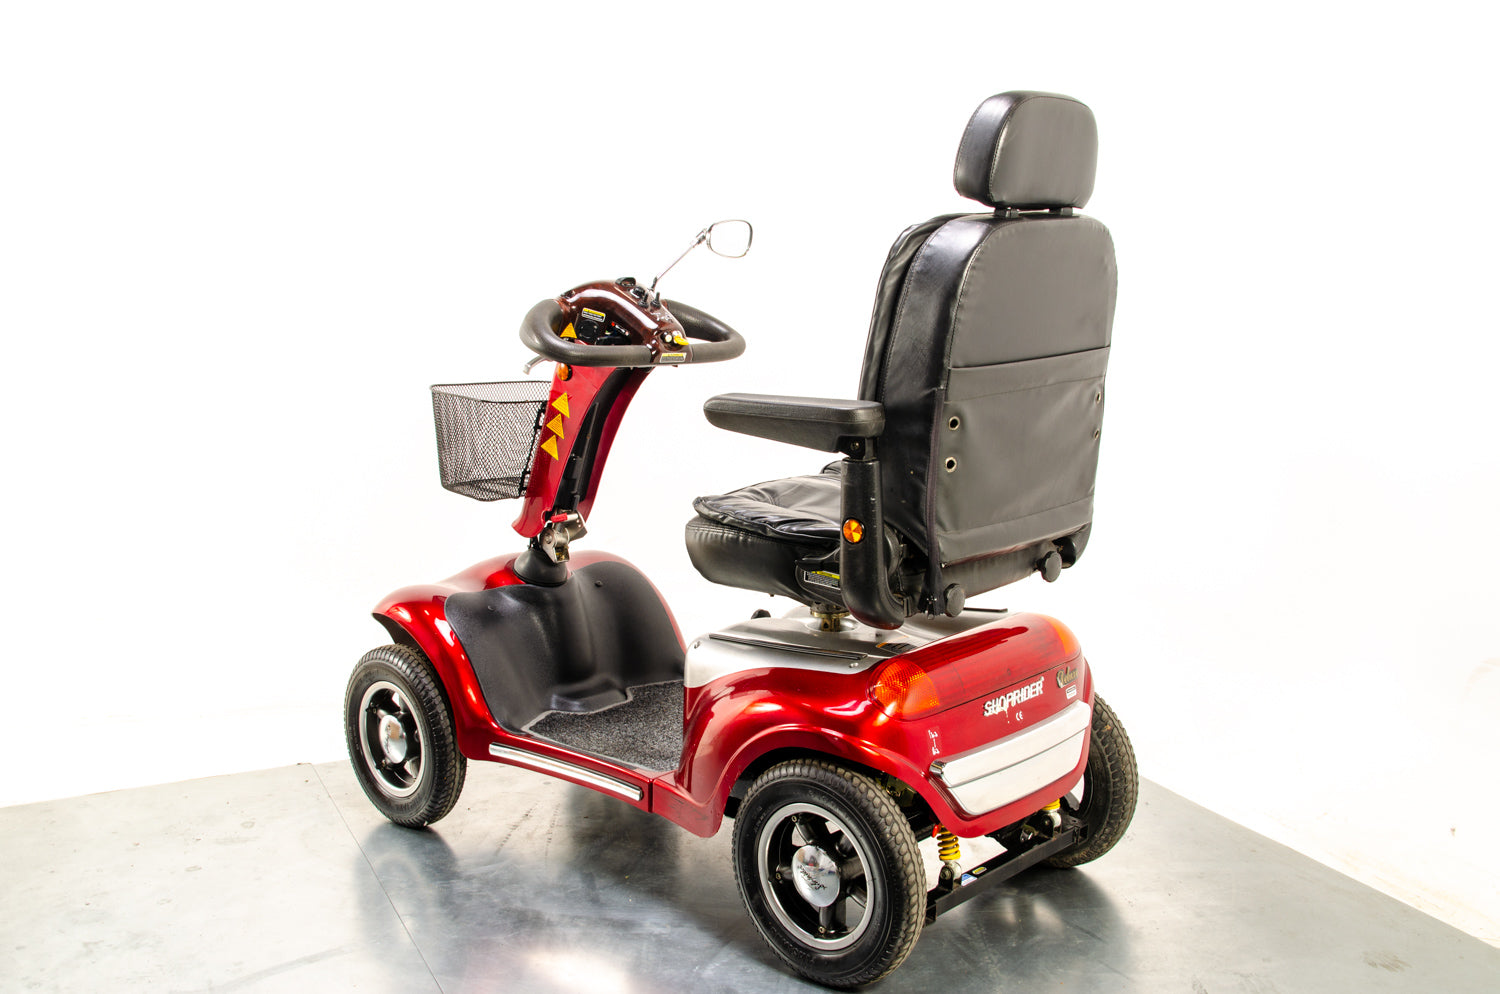 Shoprider Cordoba Off-Road All-Terrain Used Mobility Scooter Large 8mph Roma Red 13466